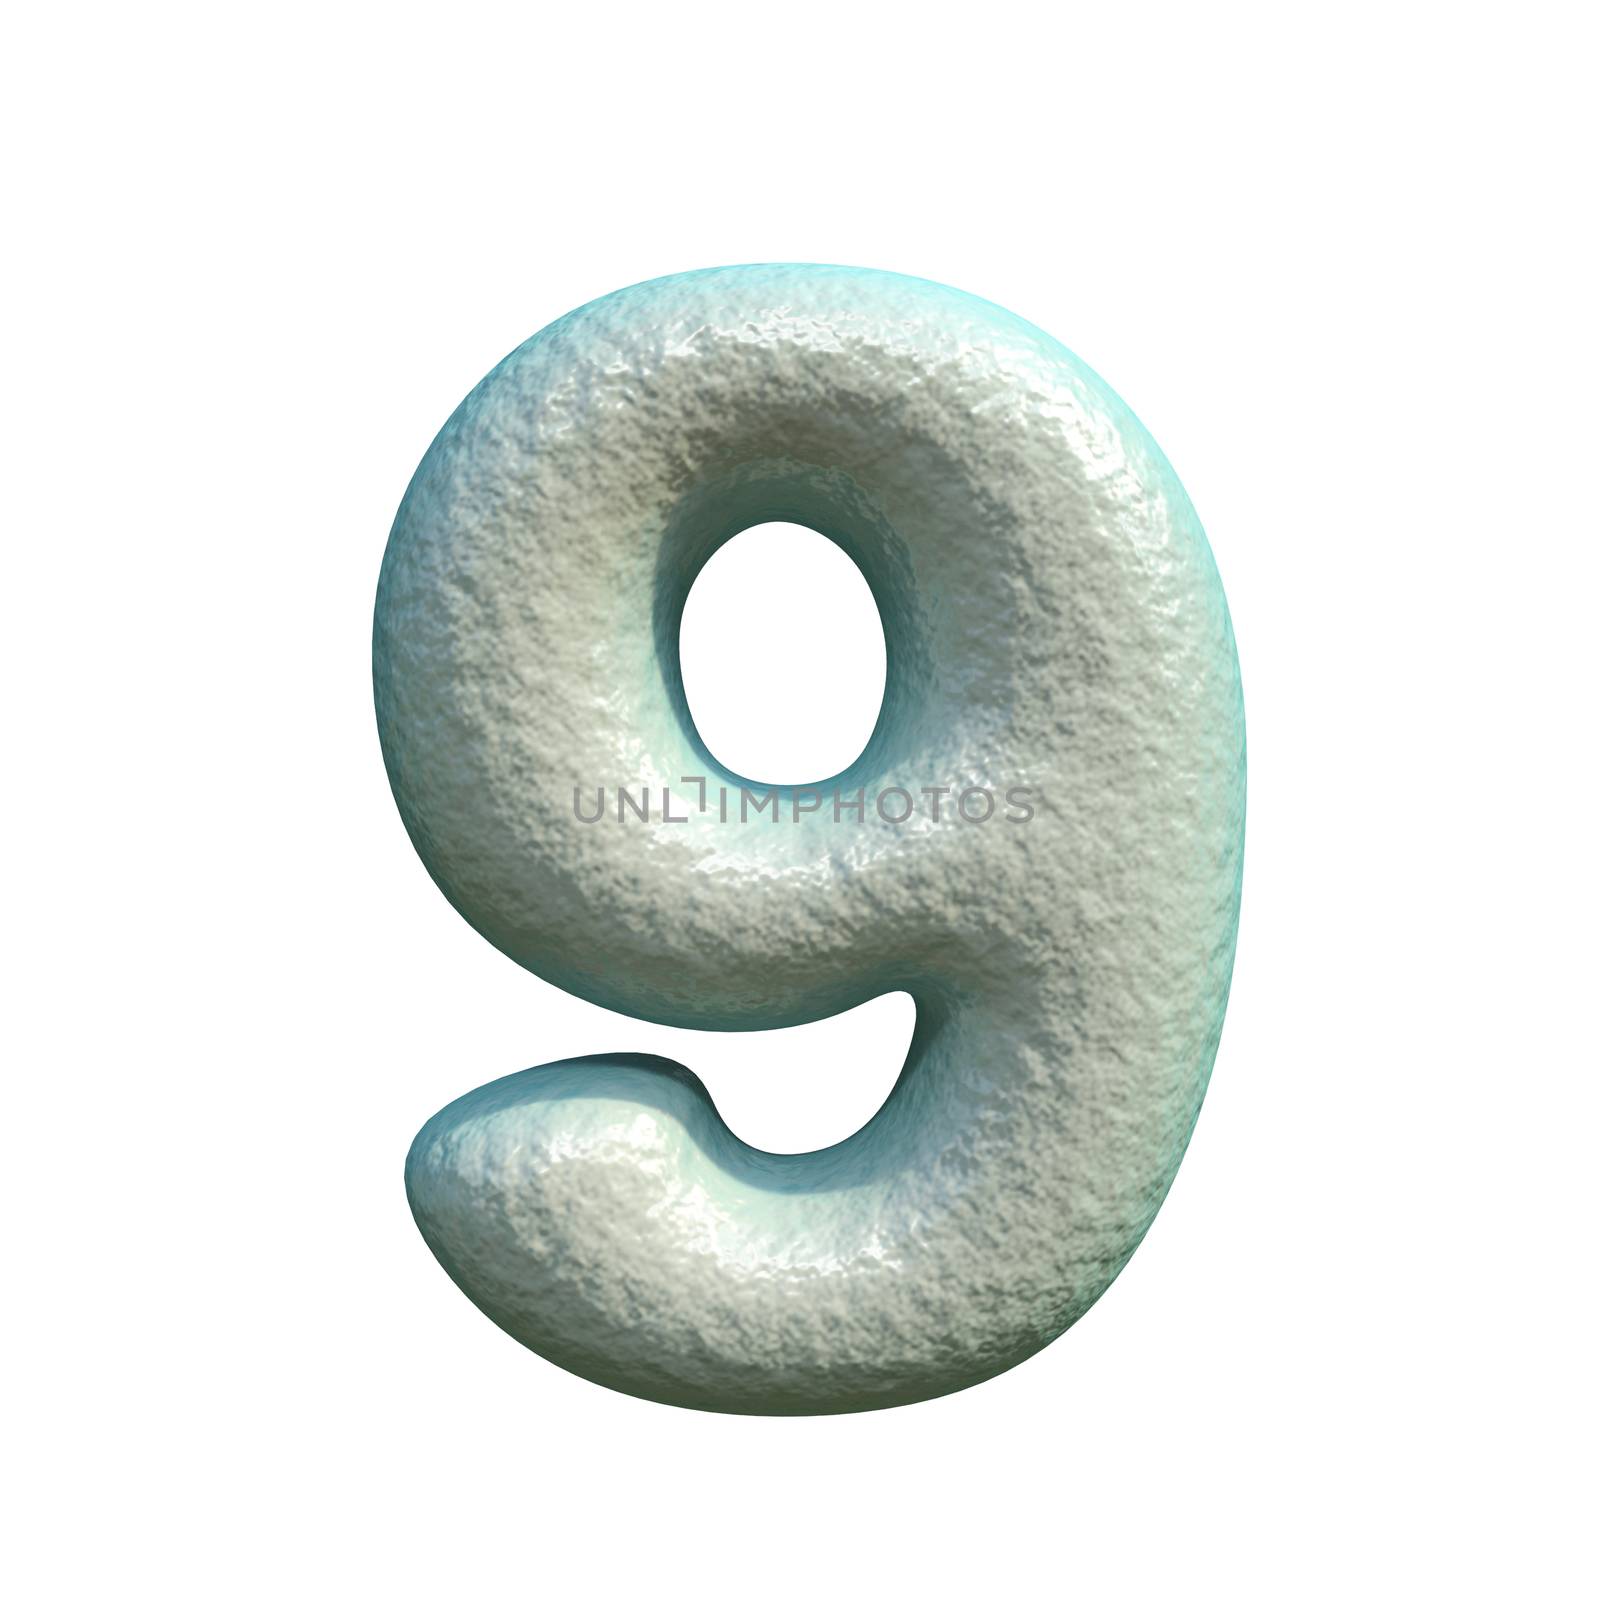 Grey blue clay Number 9 NINE 3D rendering illustration isolated on white background